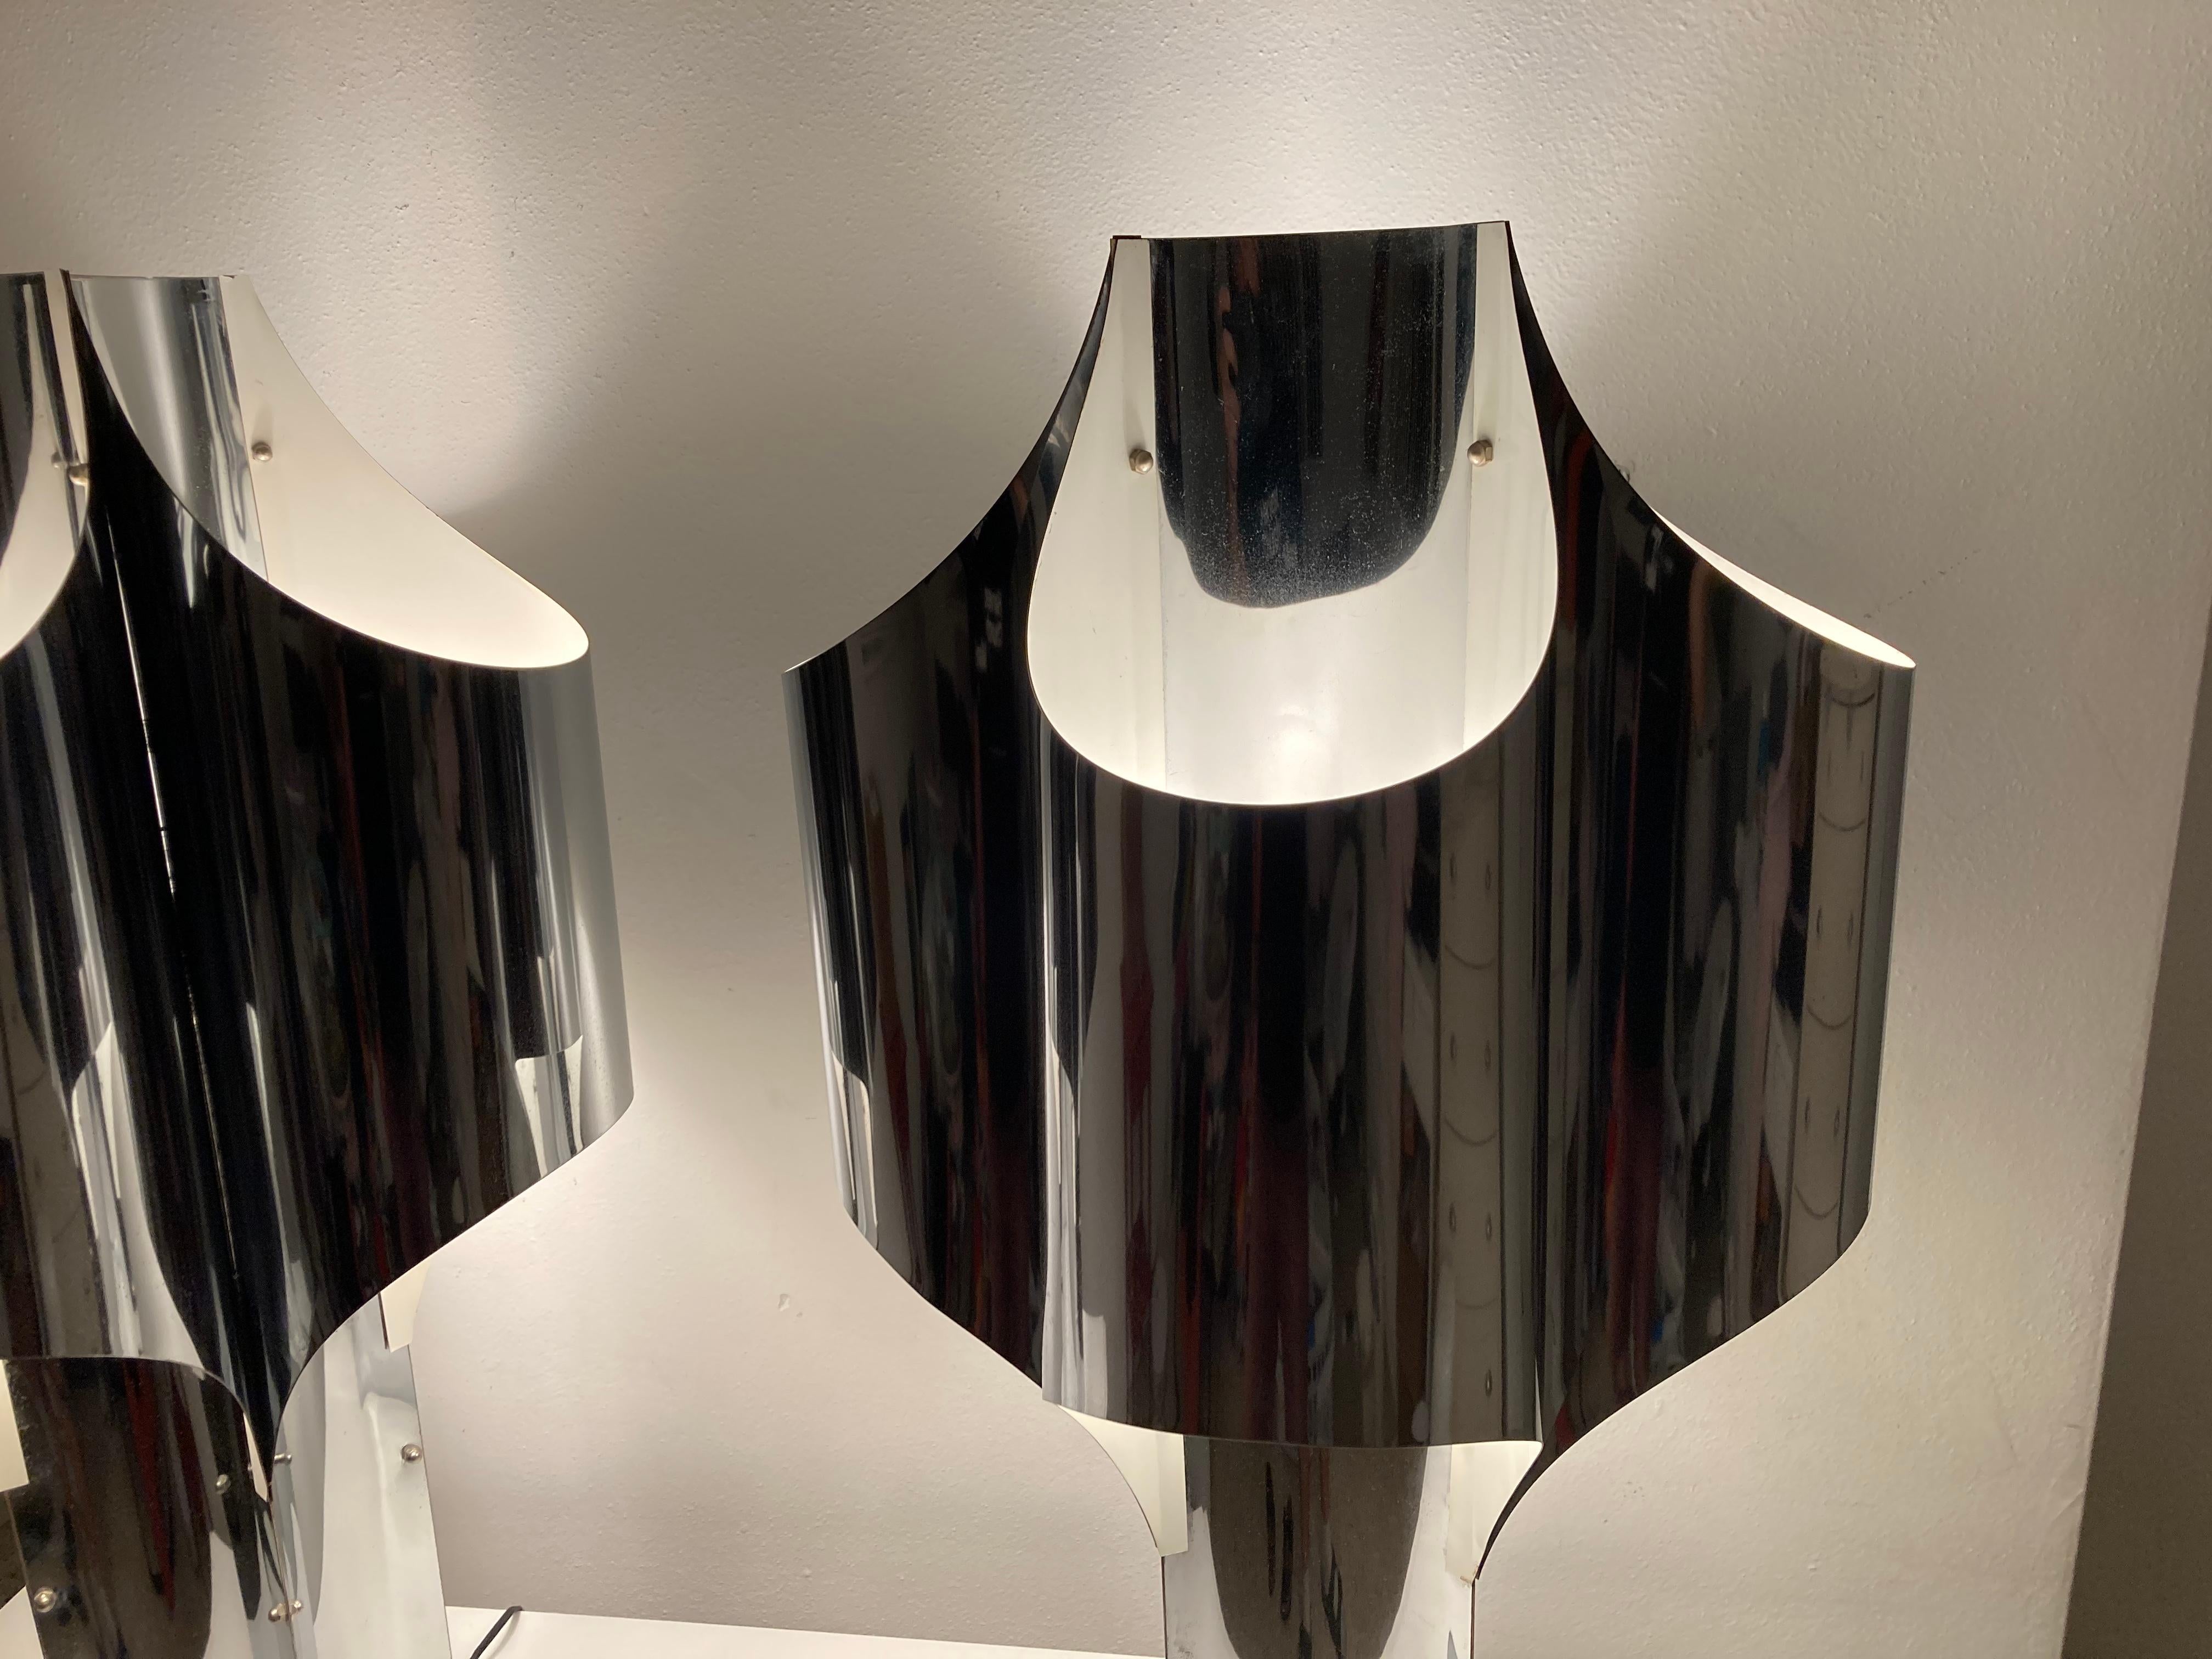 Pair of Large Chrome Table Lamps by Robert Sonneman, USA, 1960s For Sale 11